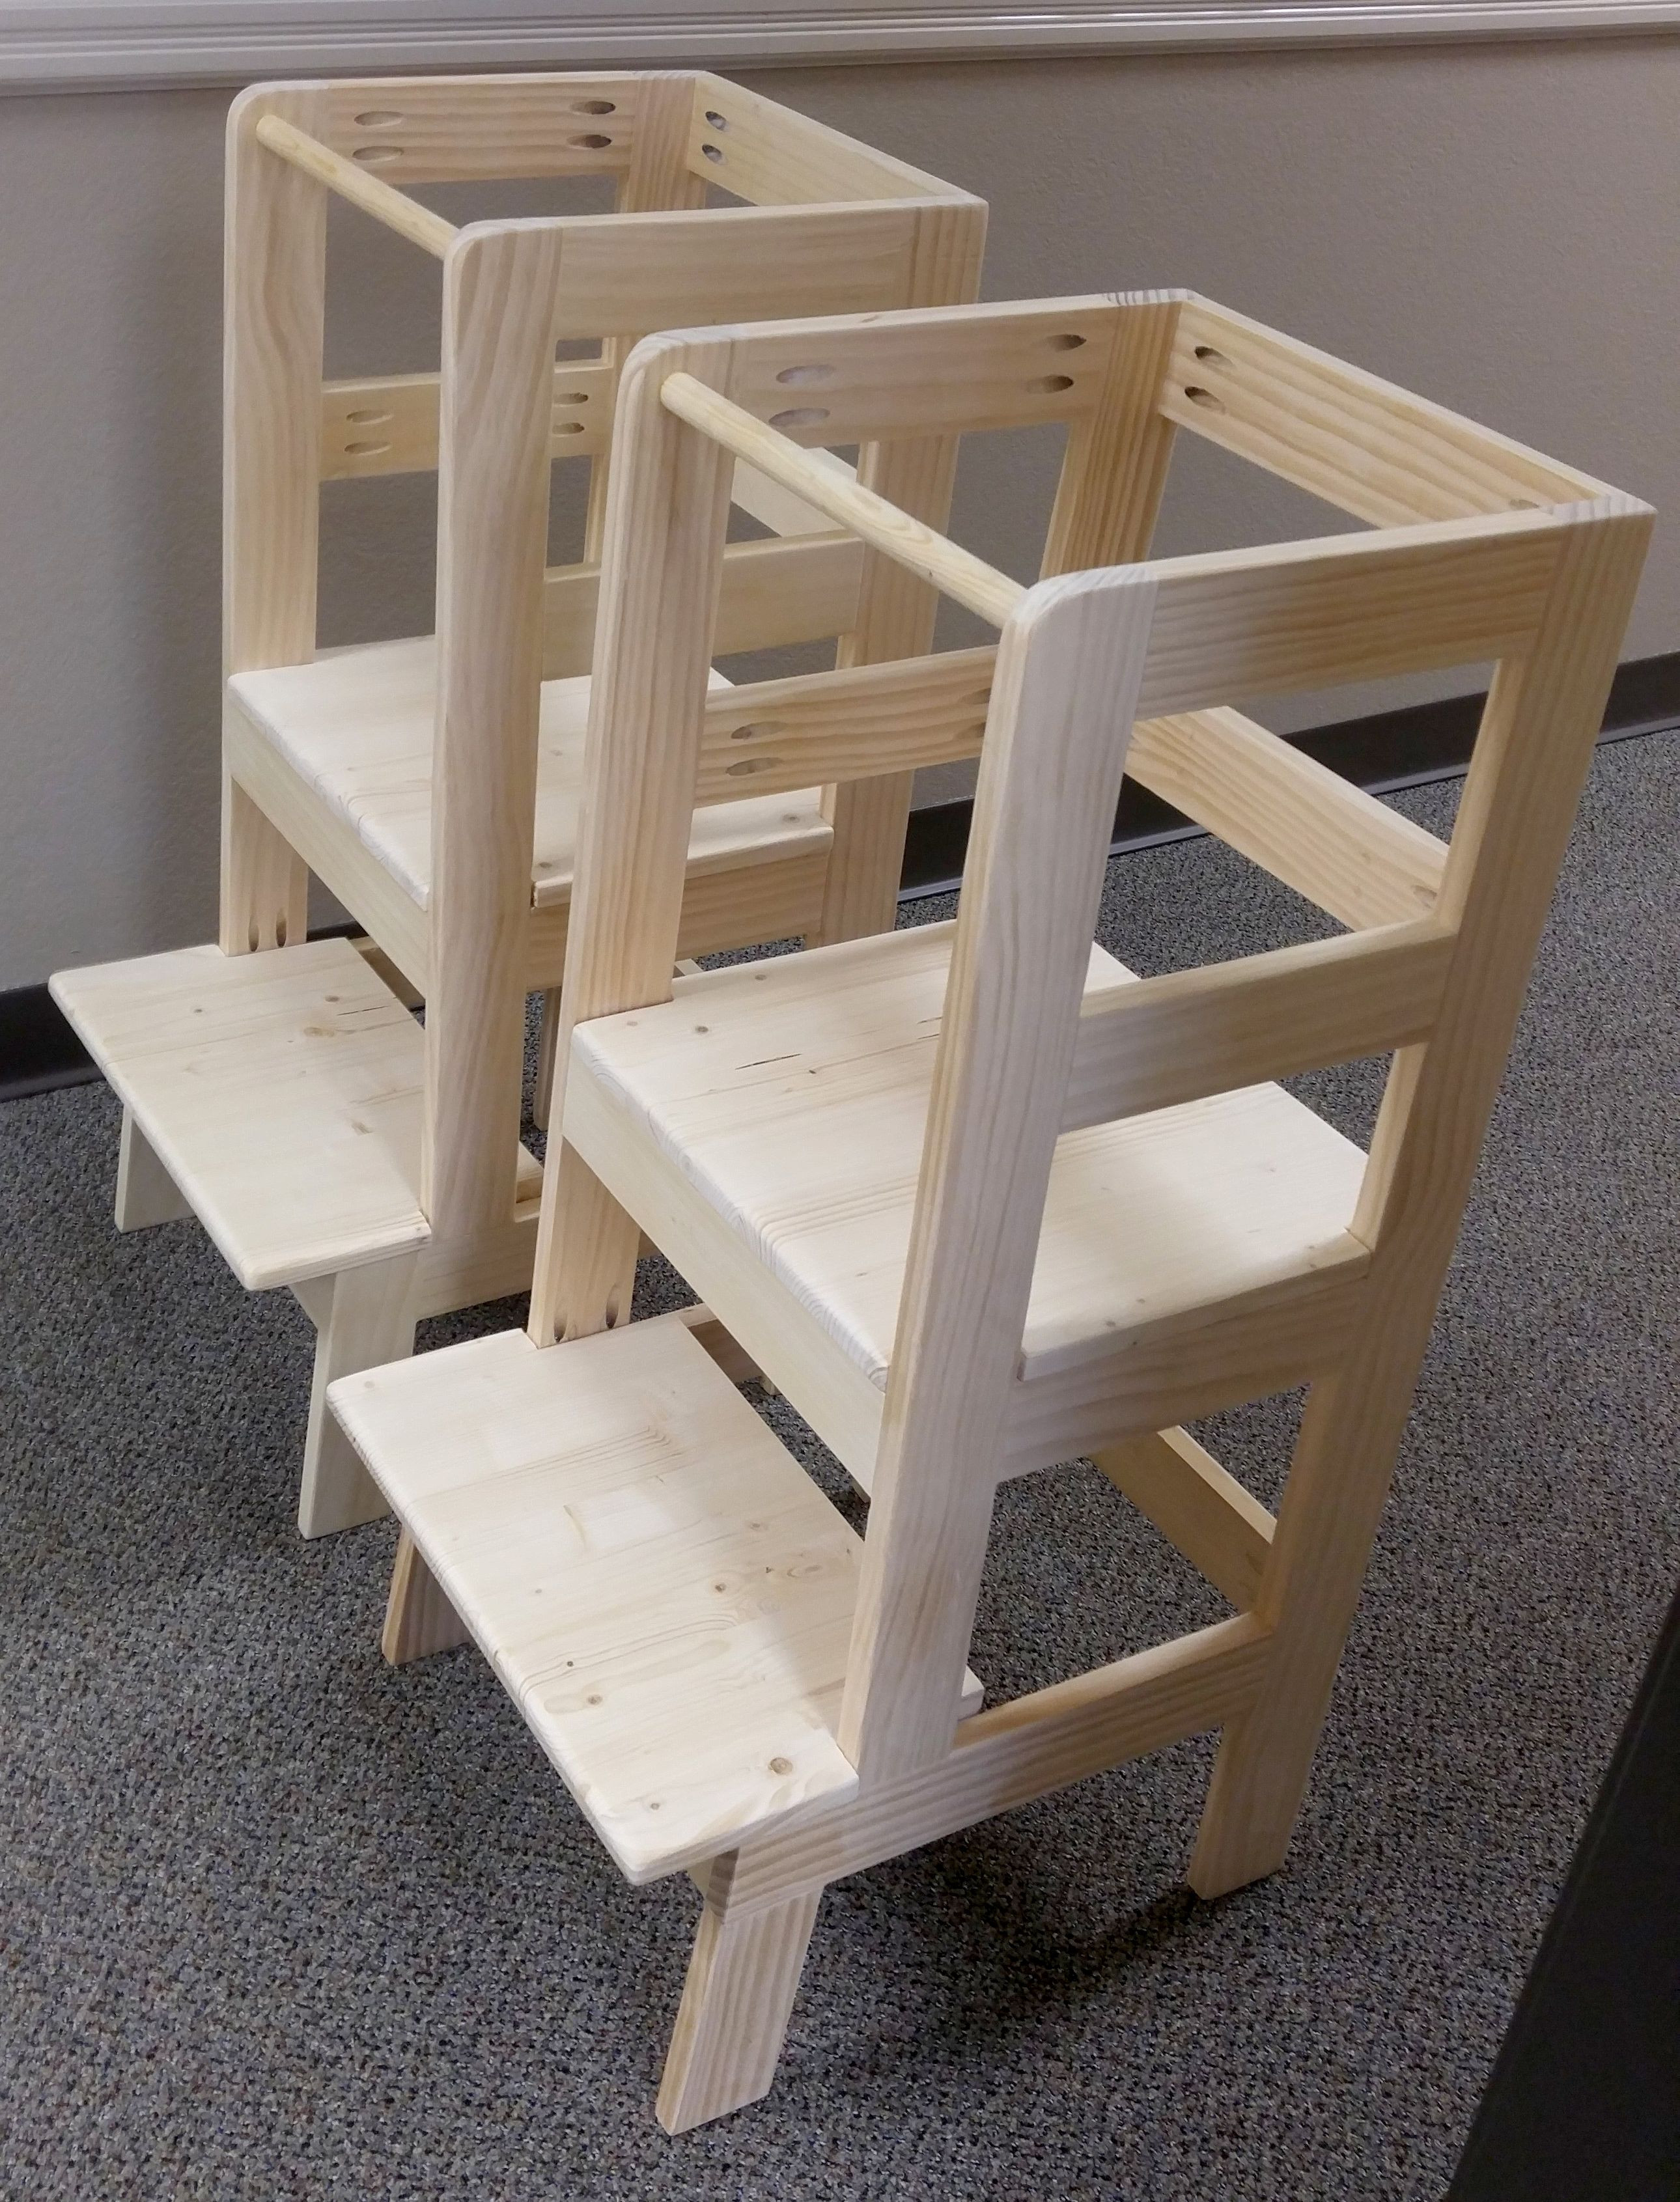 DIY Step Stool For Toddler
 Learning Tower in 2019 Around the Home